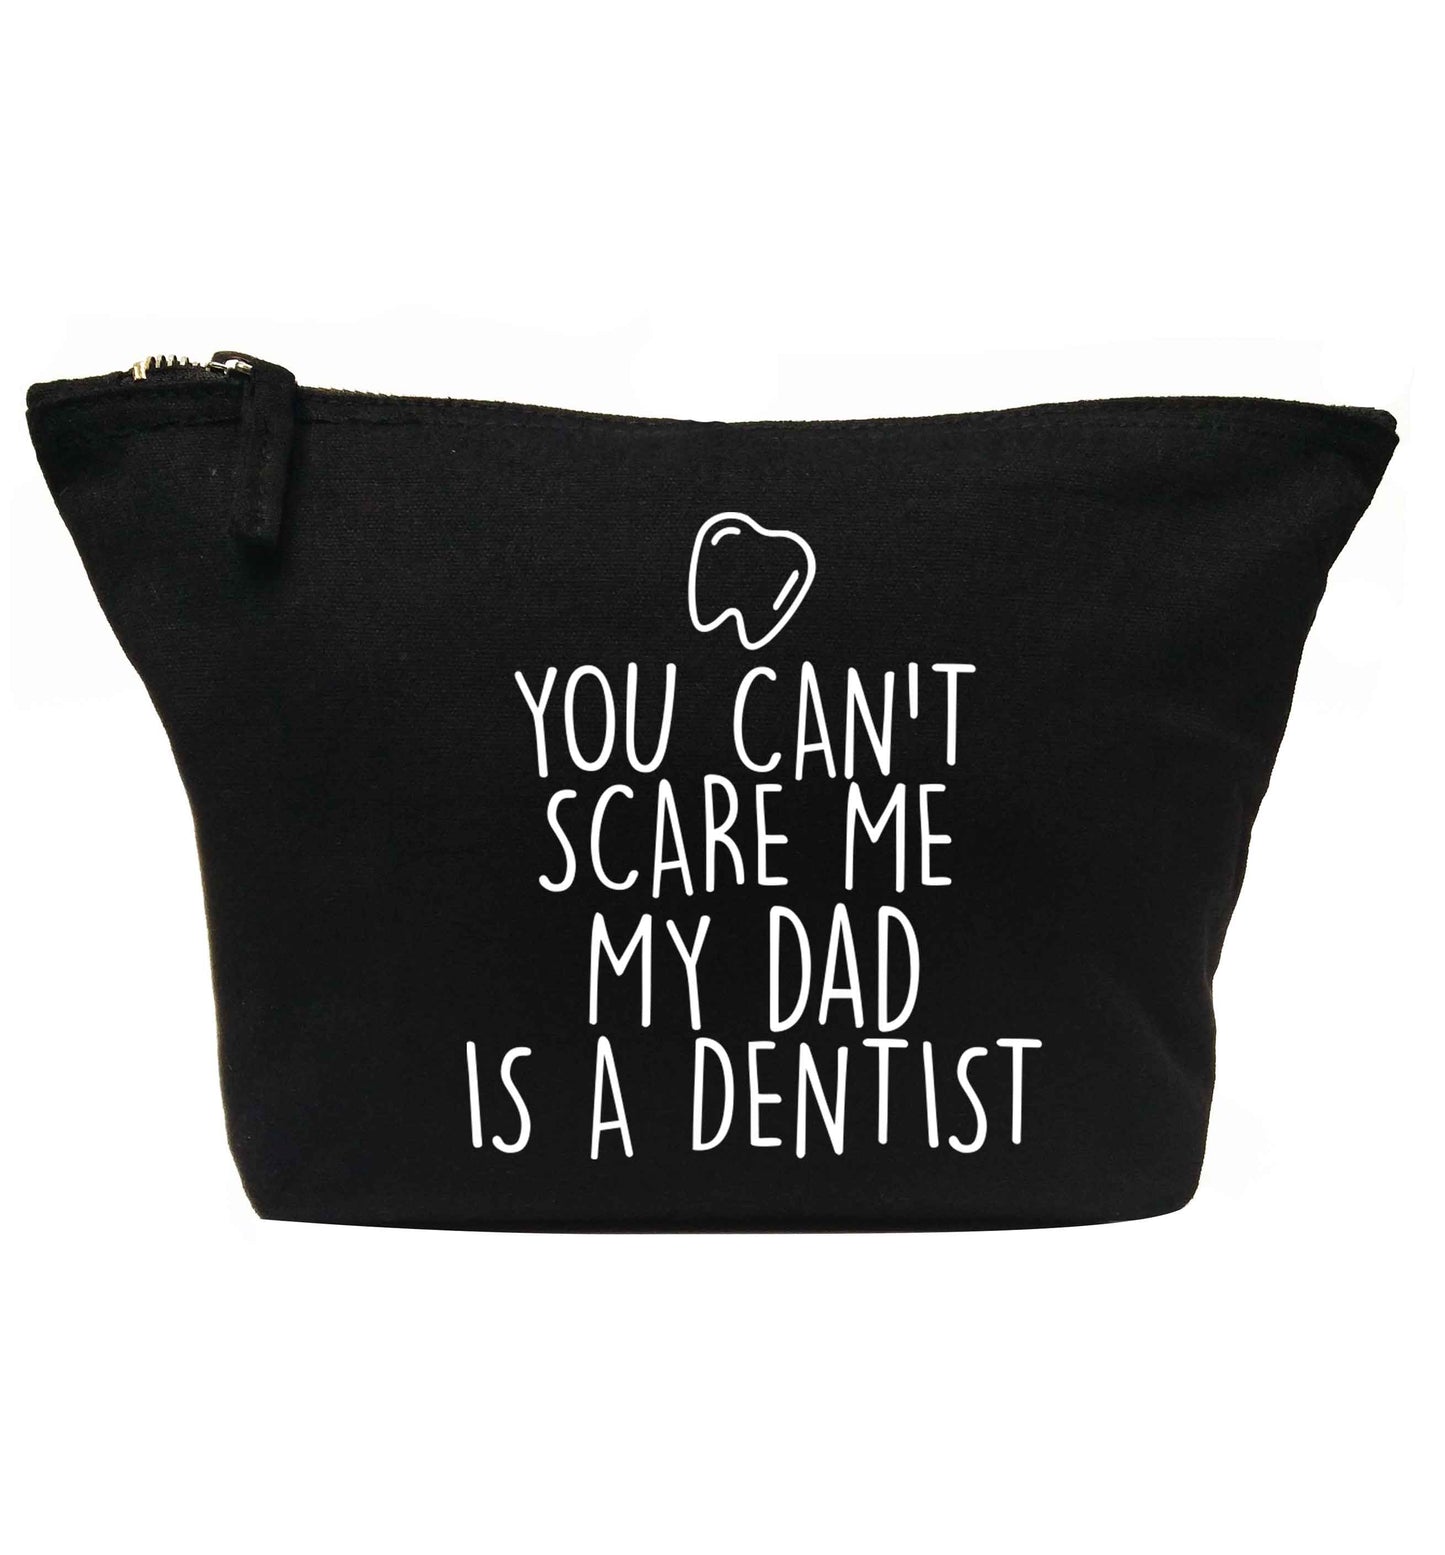 You can't scare me my dad is a dentist | Makeup / wash bag